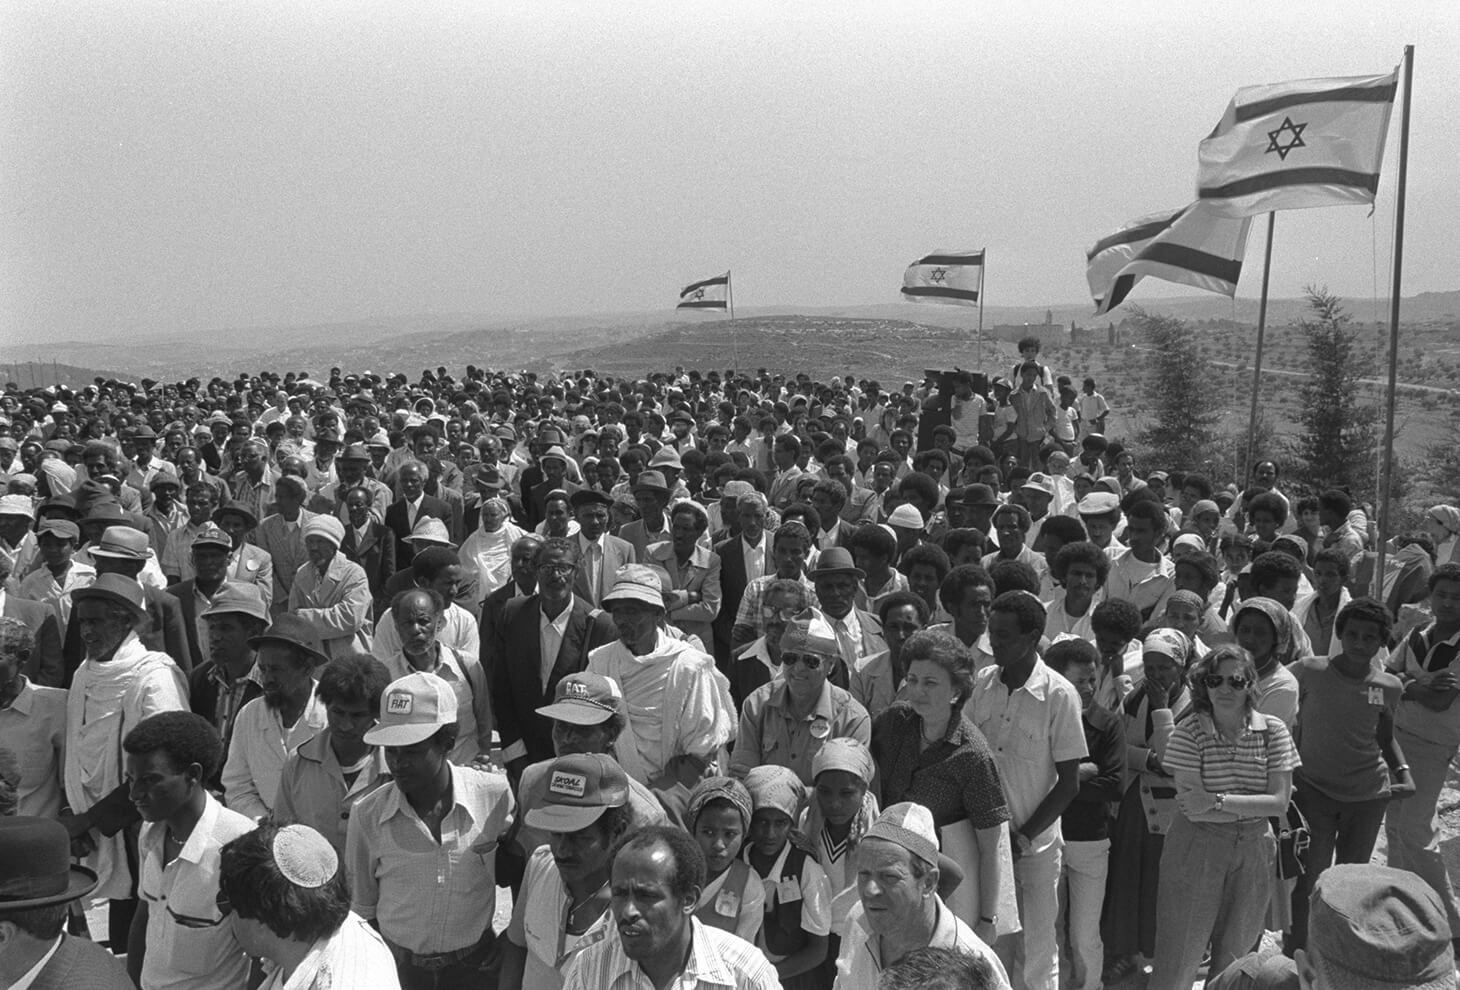 MEMBERS OF COMMUNITY OF ETHIOPIAN JEWS IN ISRAEL NEAR KIBBUTZ RAMAT RAHEL FOR TREE-PLANTING CEREMONY TO COMEMORATE BROTHERS WHO DIED ON JOURNEY TO THE PROMISED LAND. Photo by: Nati Hernik, GPO